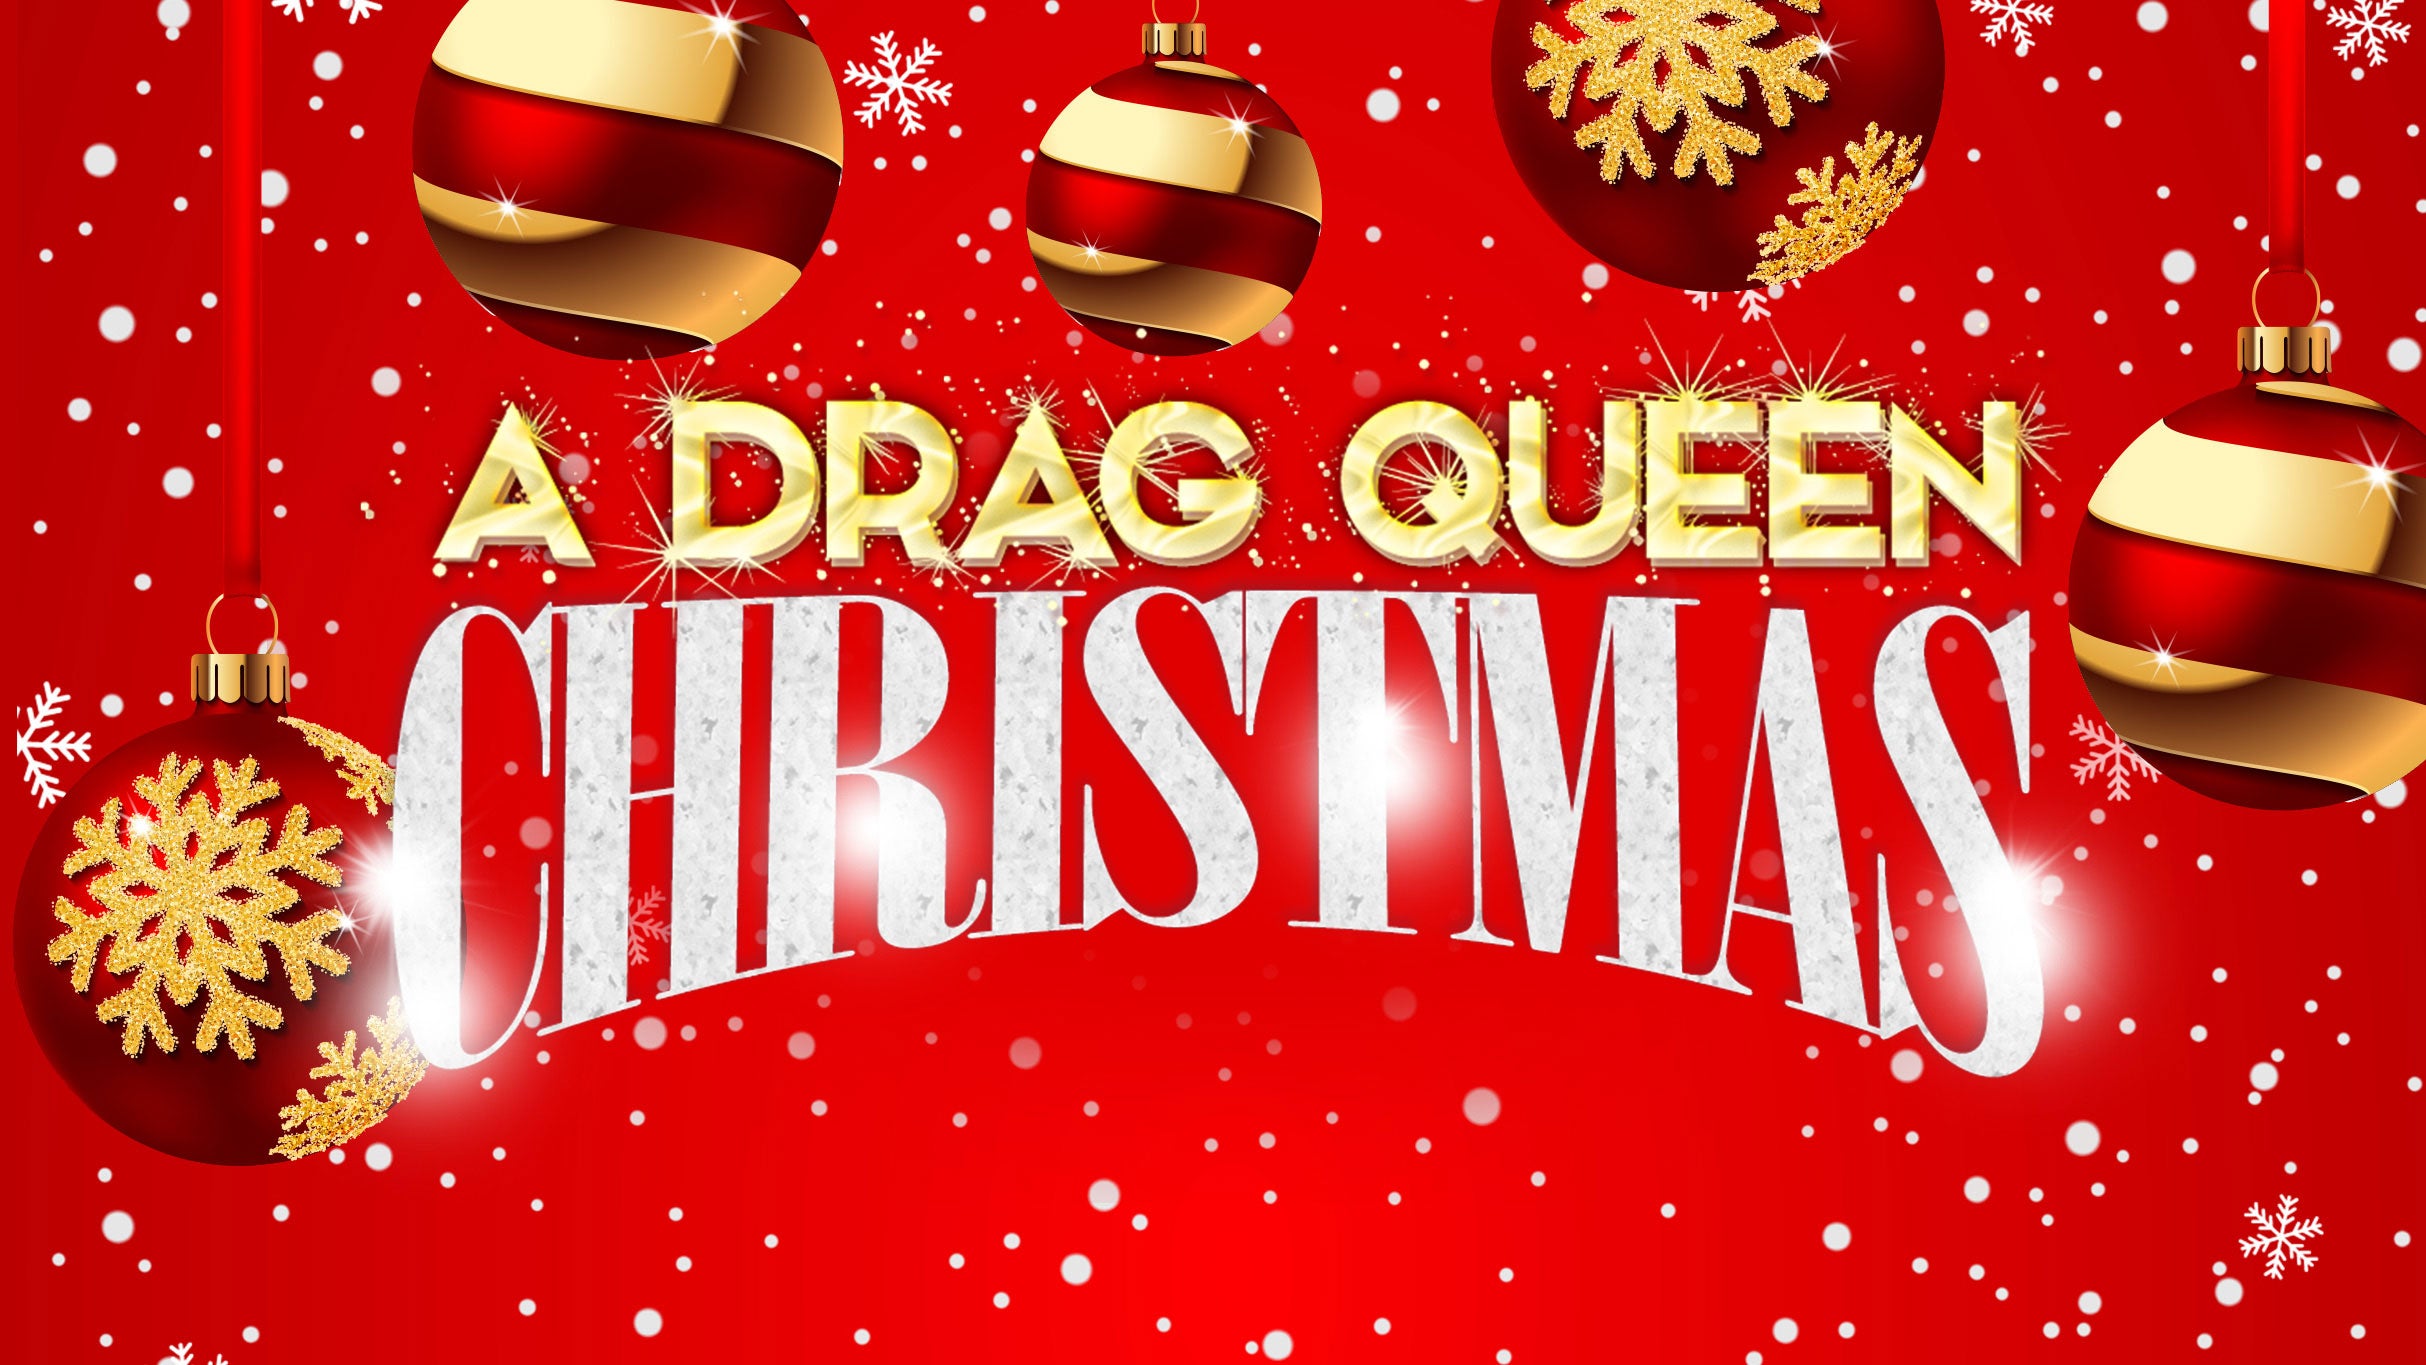 exclusive presale code for A Drag Queen Christmas affordable tickets in Portland